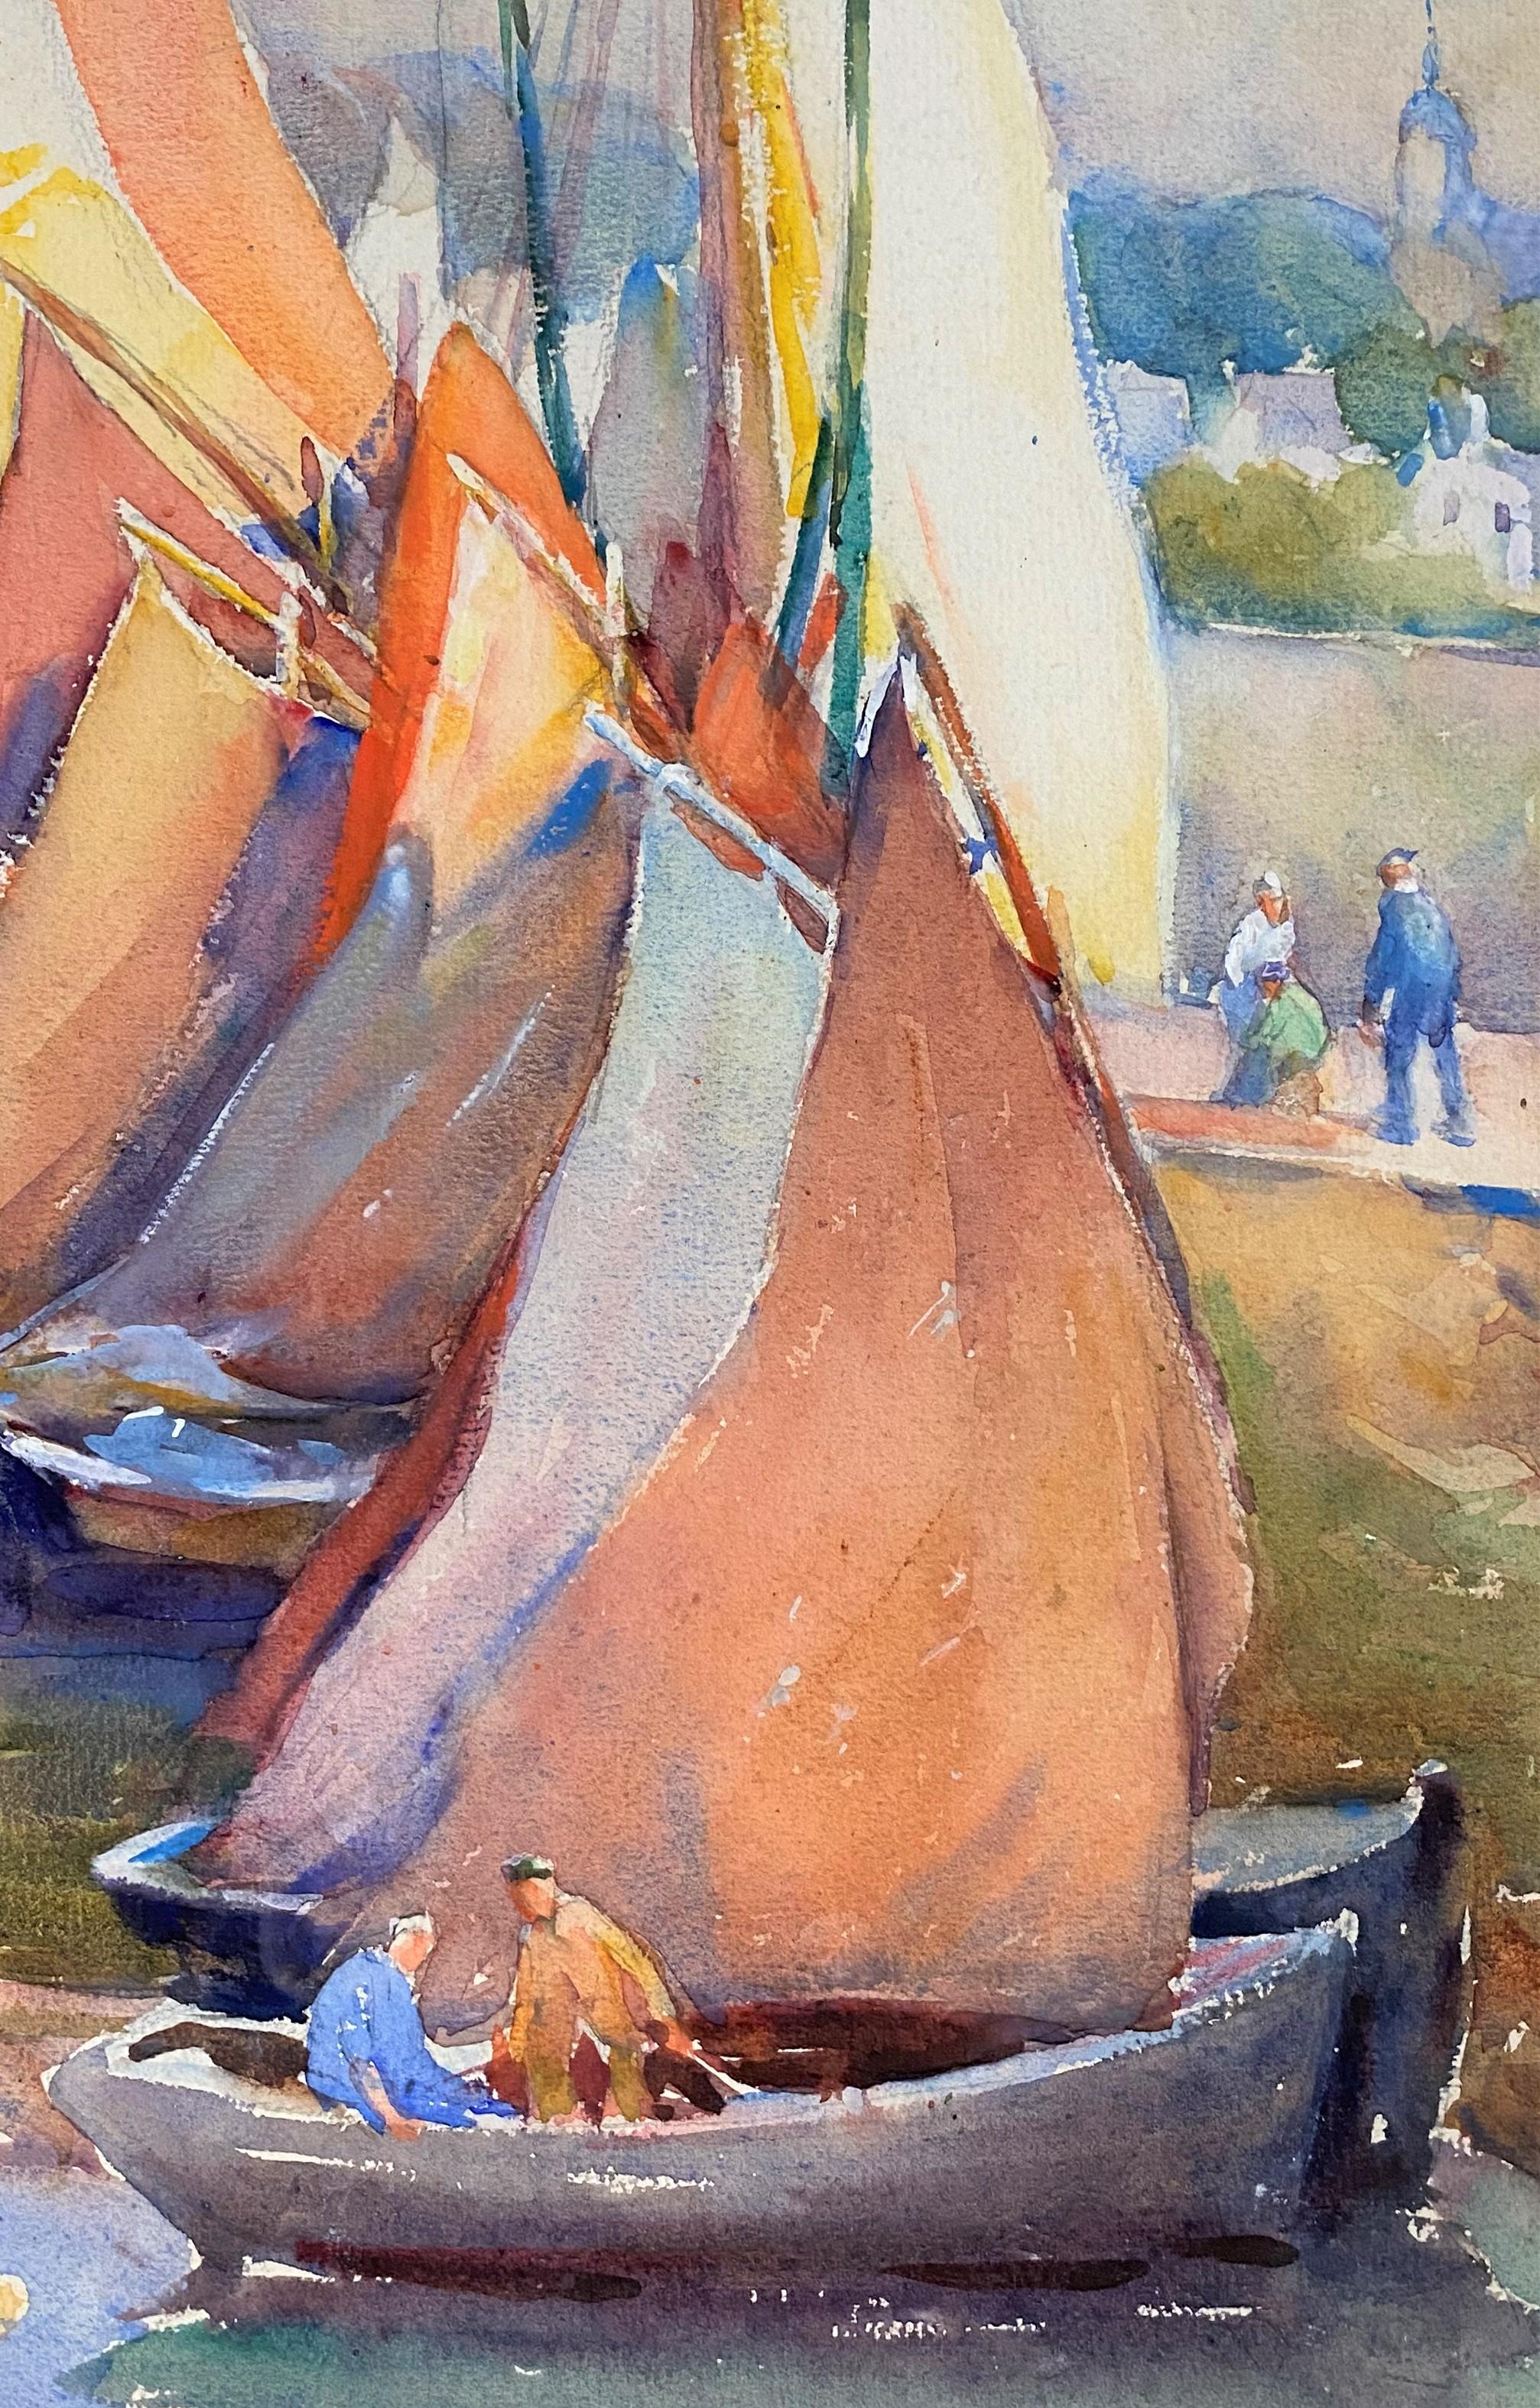 Watercolor of Boats - American Impressionist Art by Mabel May Woodward